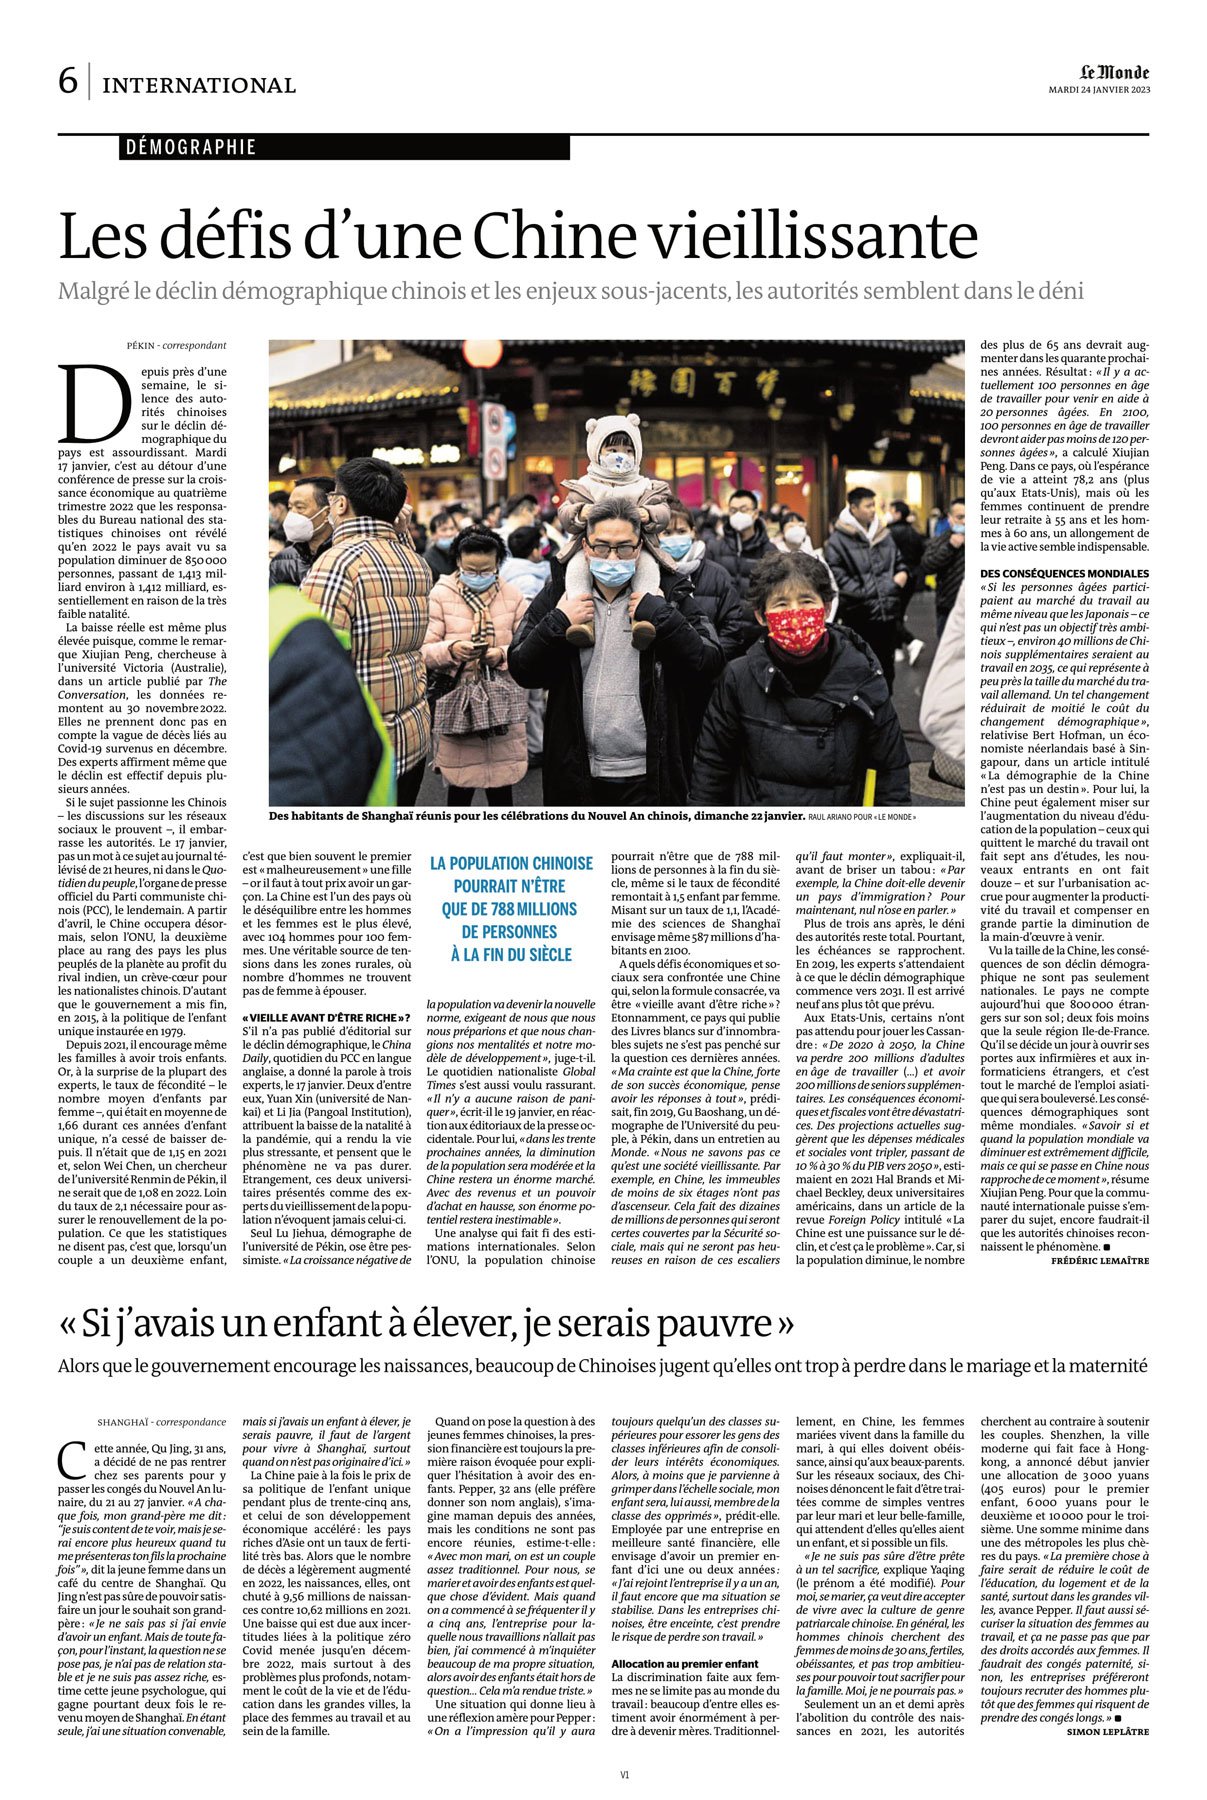  Decrease of China’s population photographed for Le Monde in Shanghai, China 